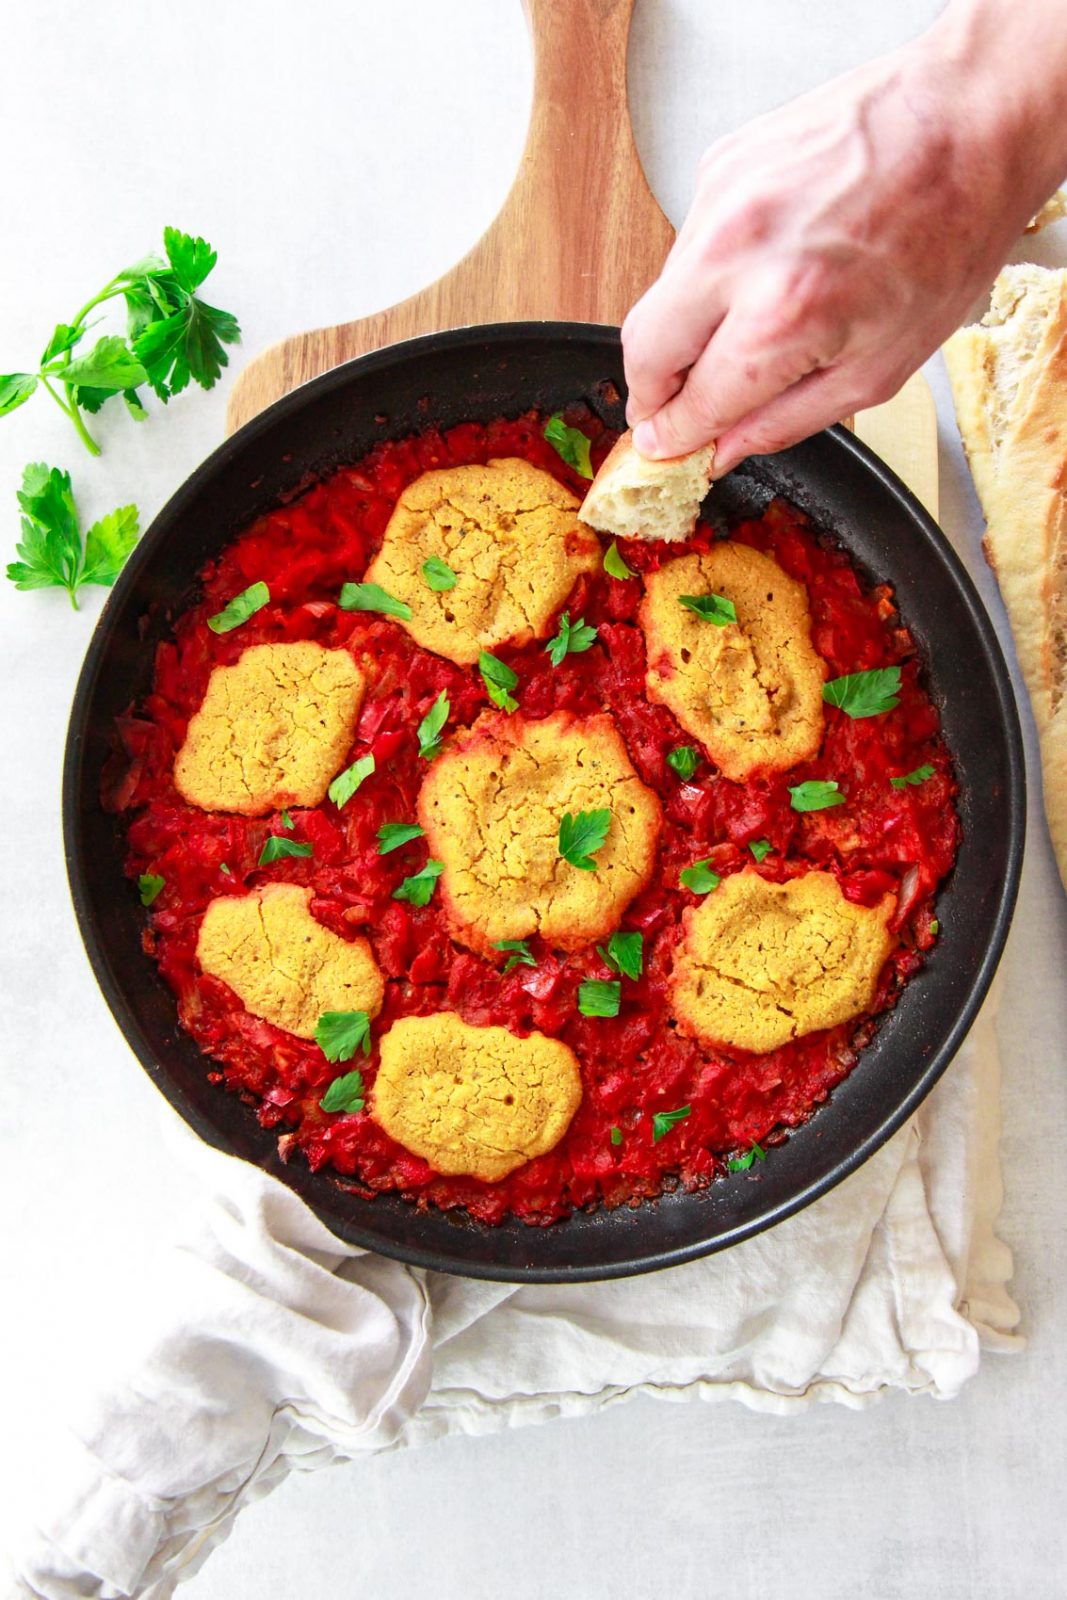 This vegan shakshuka make a delicious Middle Eastern breakfast. This Mediterranean brunch recipe is made plant based using chickpea based eggs baked in a tomato and red pepper sauce.